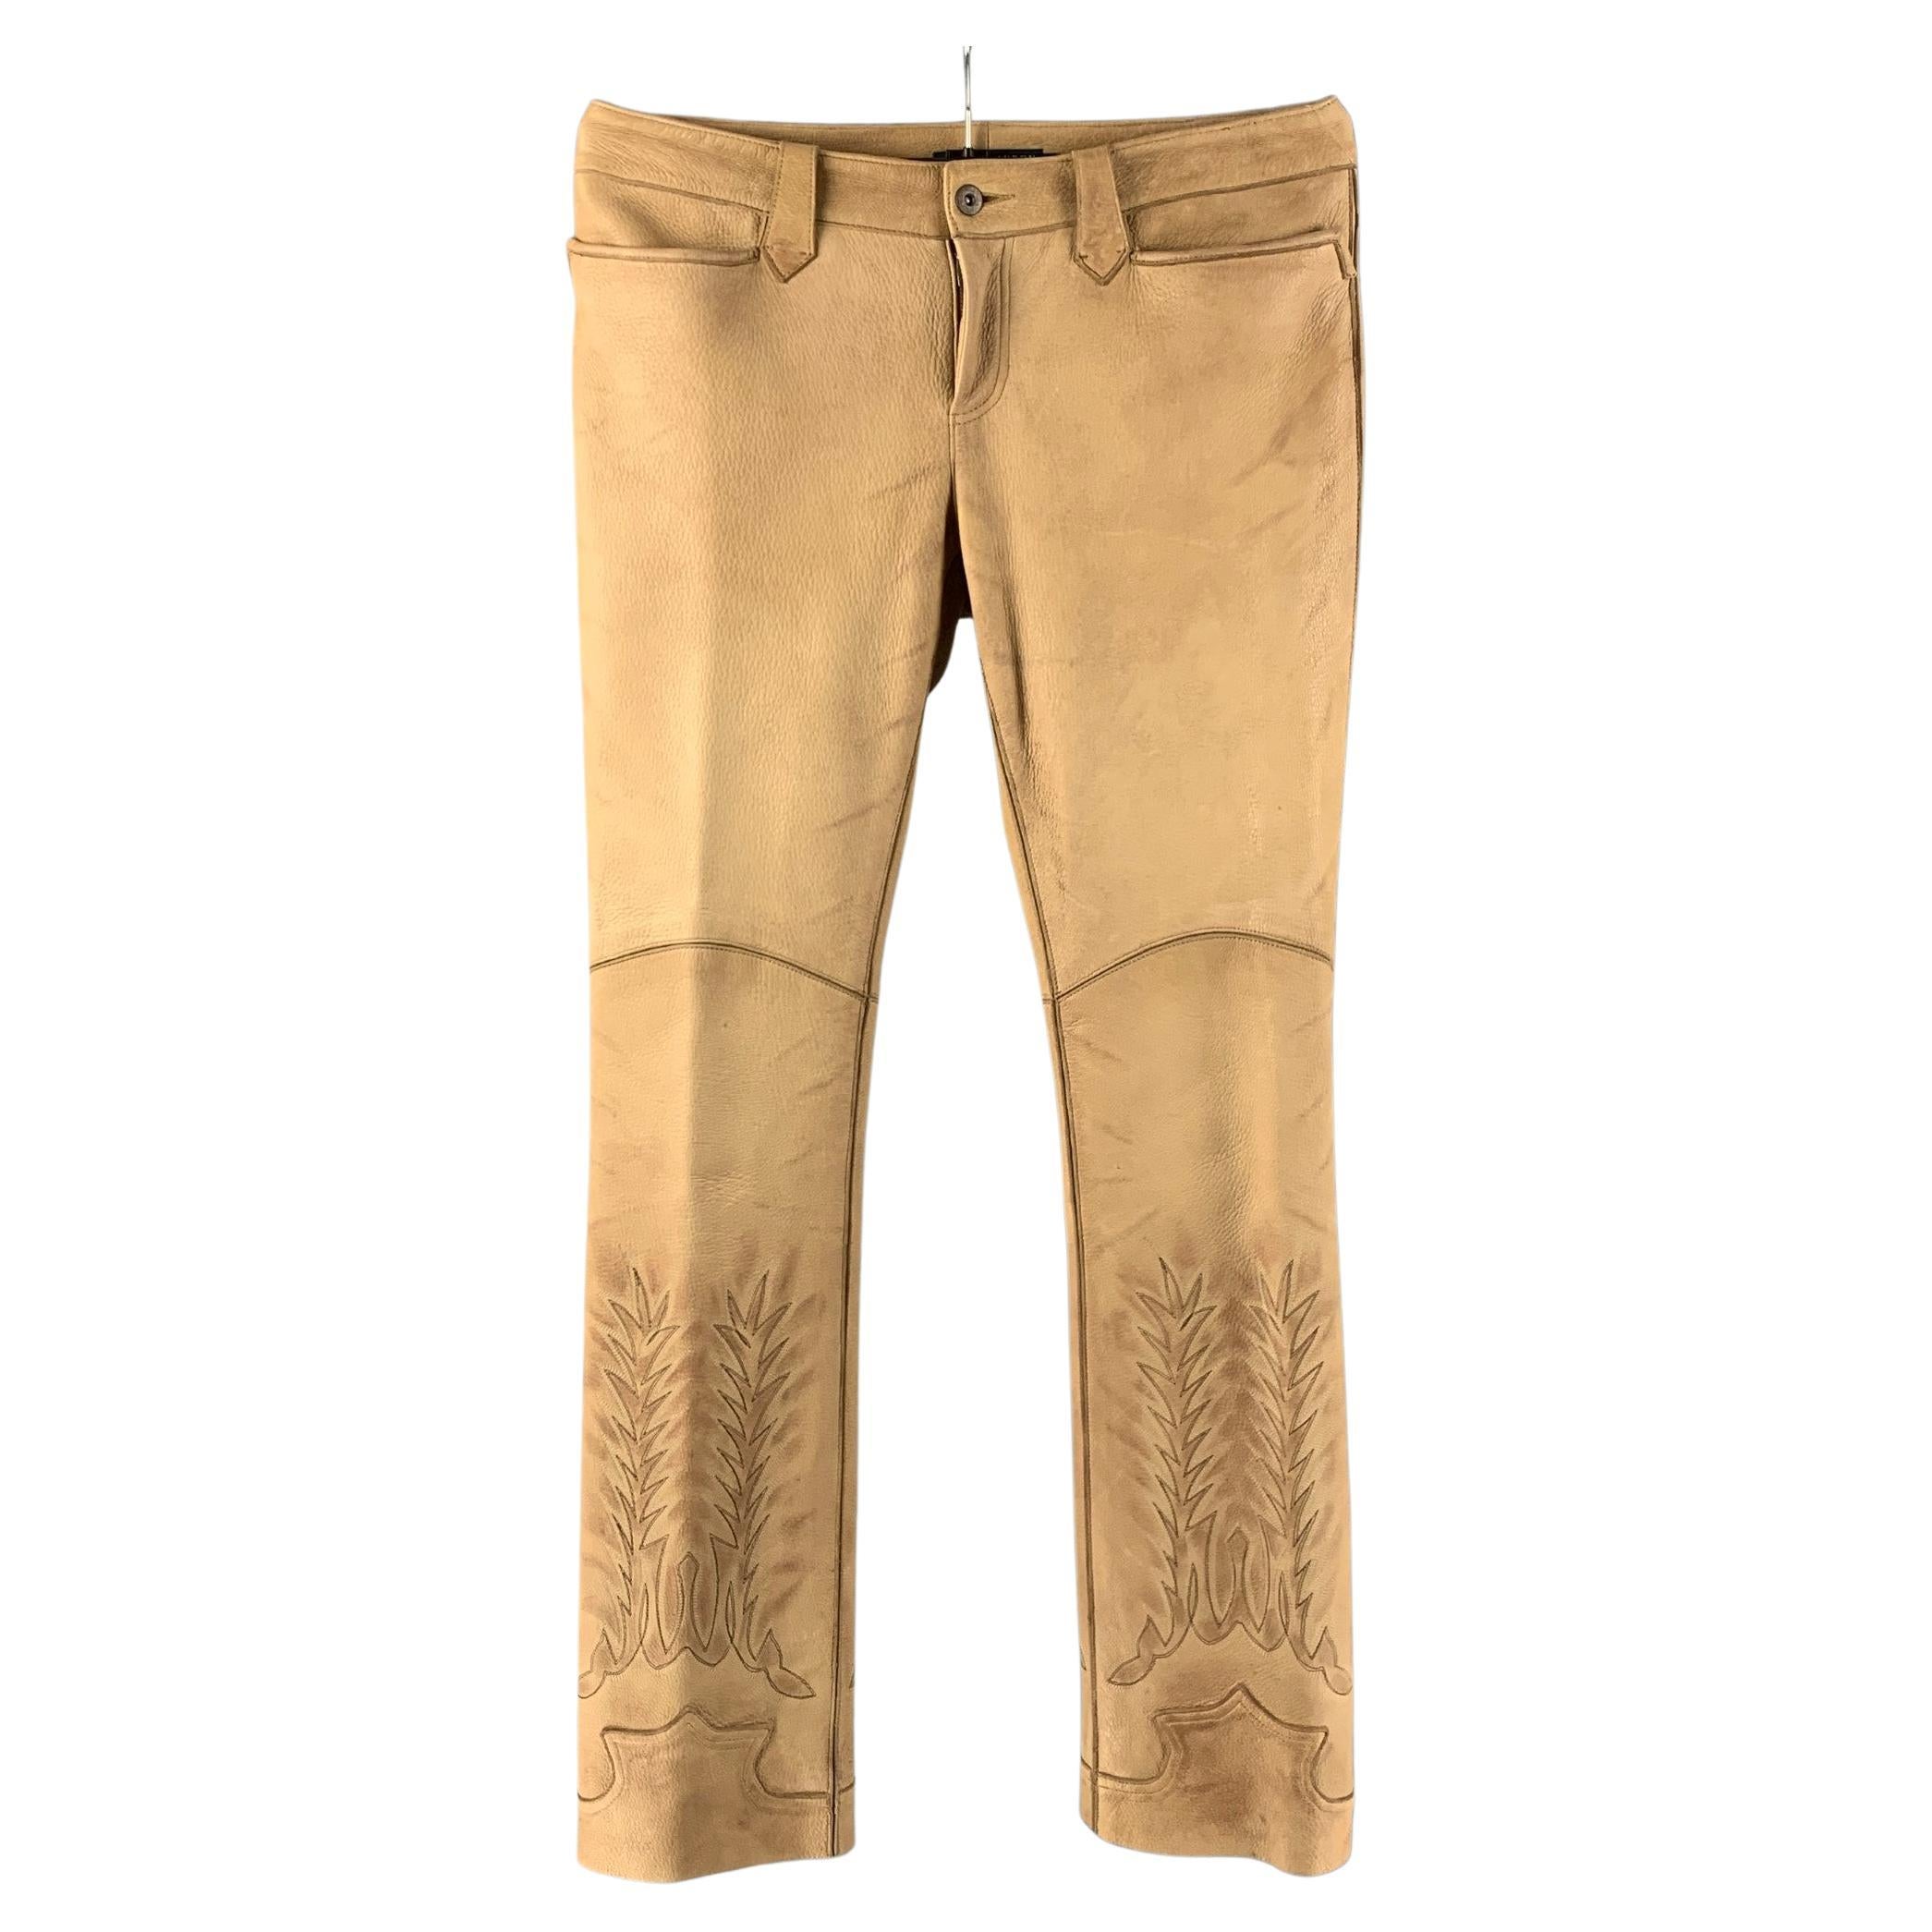 Ralph Lauren Womens Blue Label Cargo Pant with Leather Accents